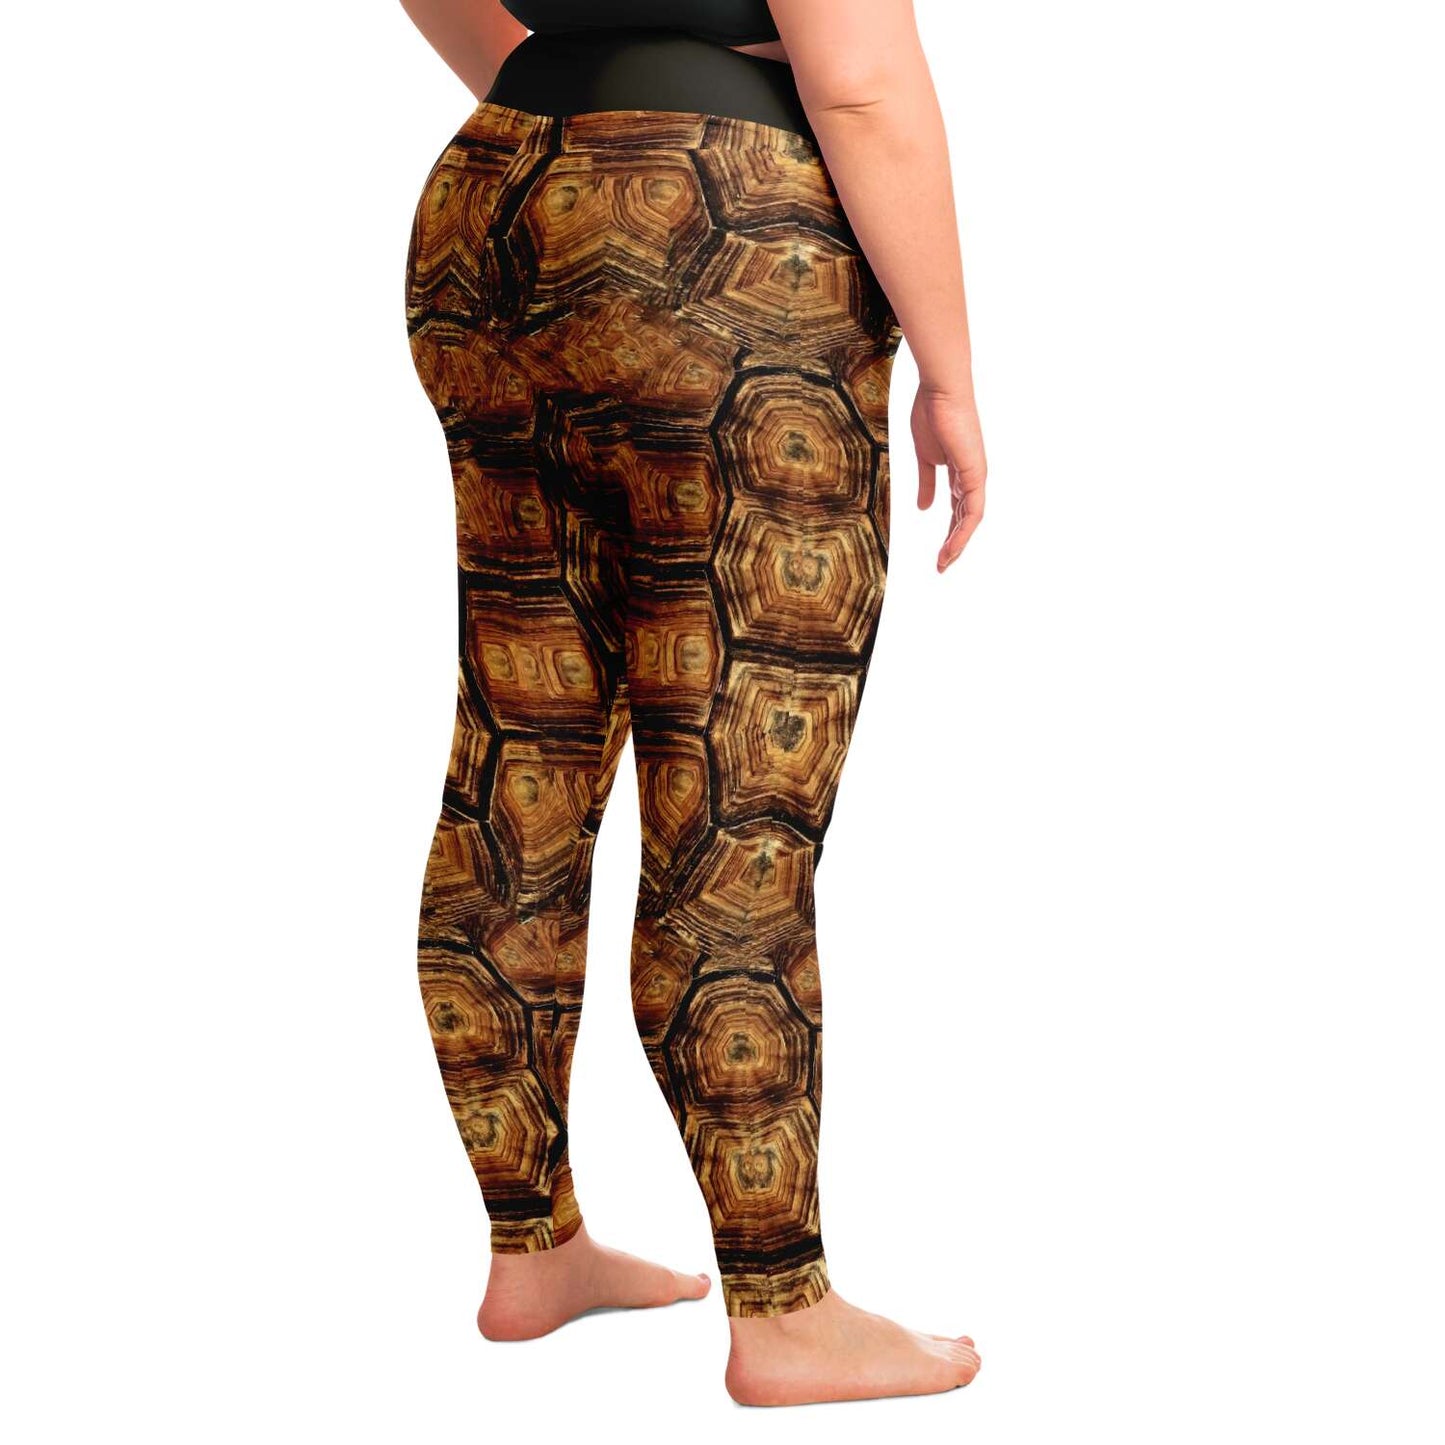 Side view of model wearing turtle leggings / skins plus size for scuba diving, yoga and sports